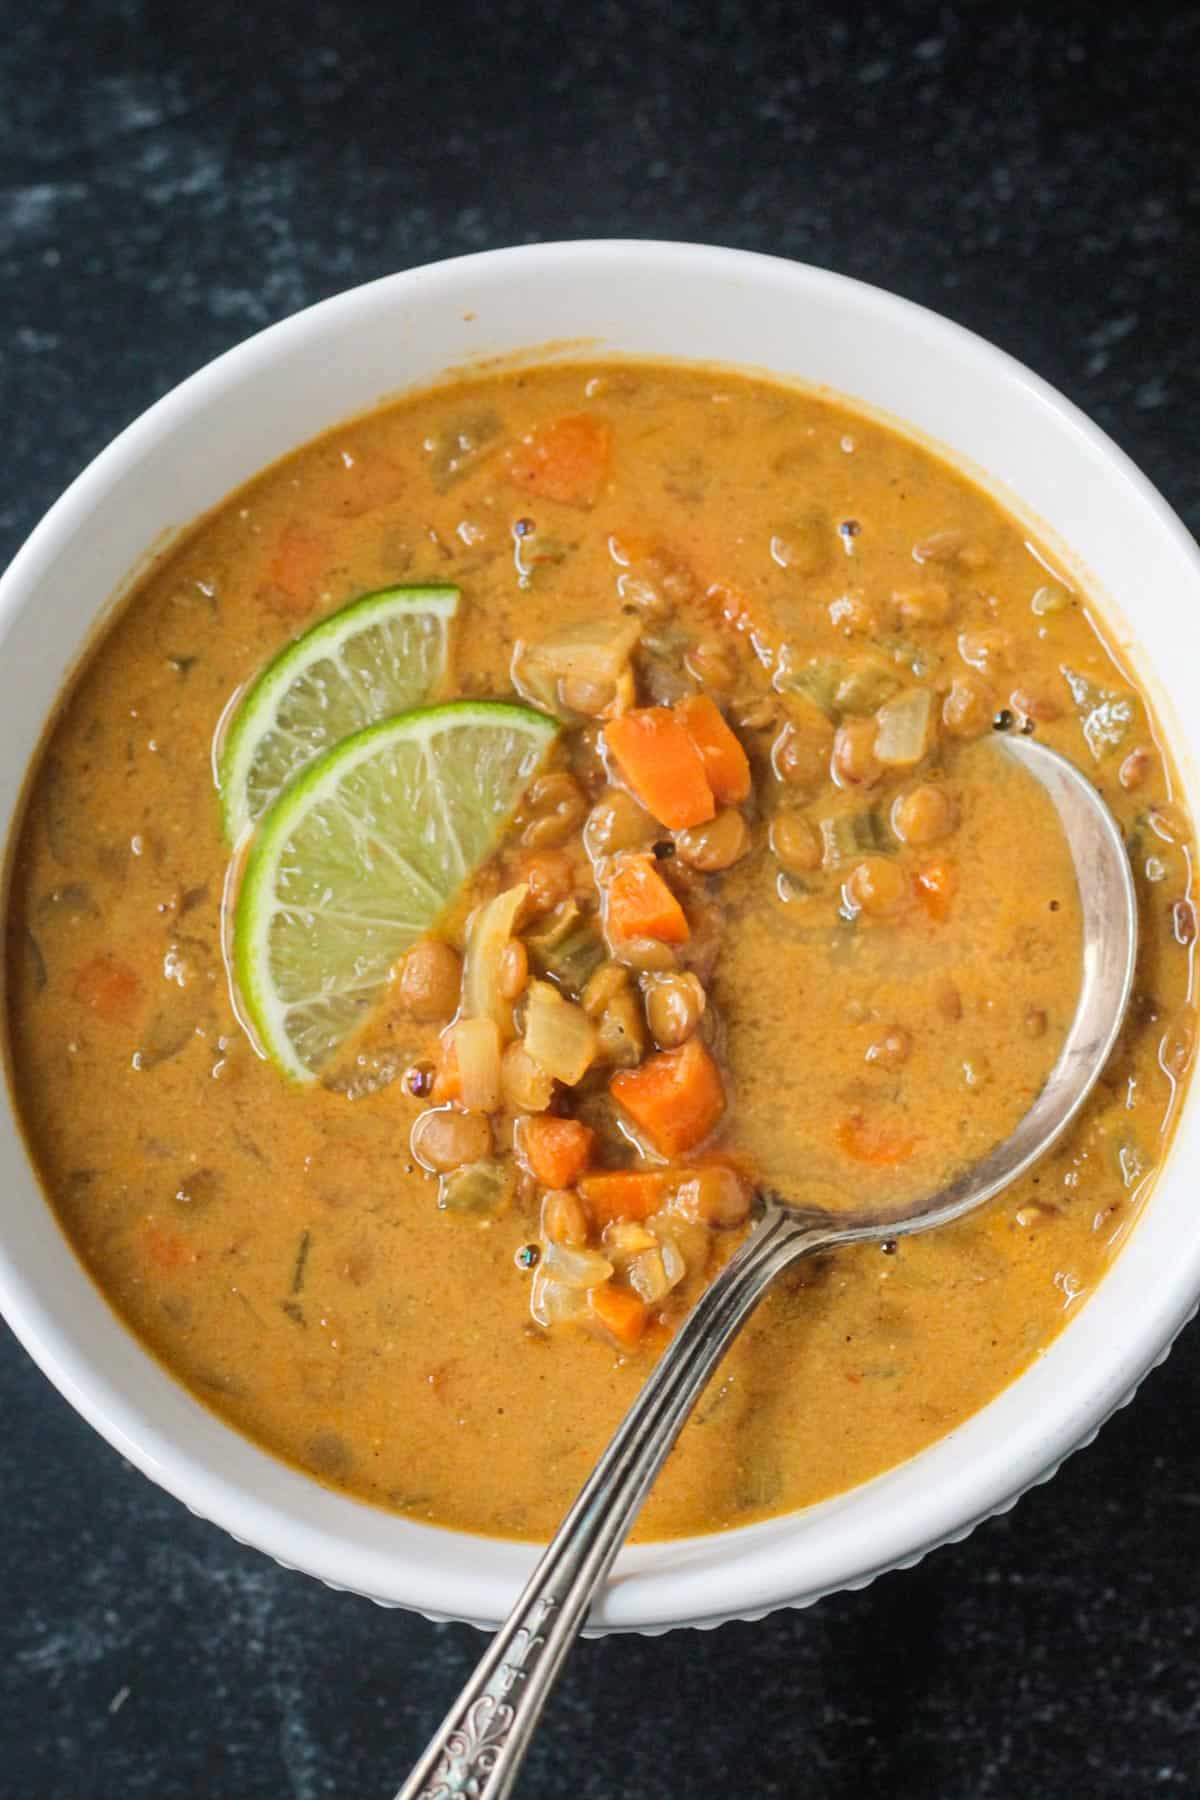 Metal spoon in a bowl of lentil soup garnished with two lime wedges.